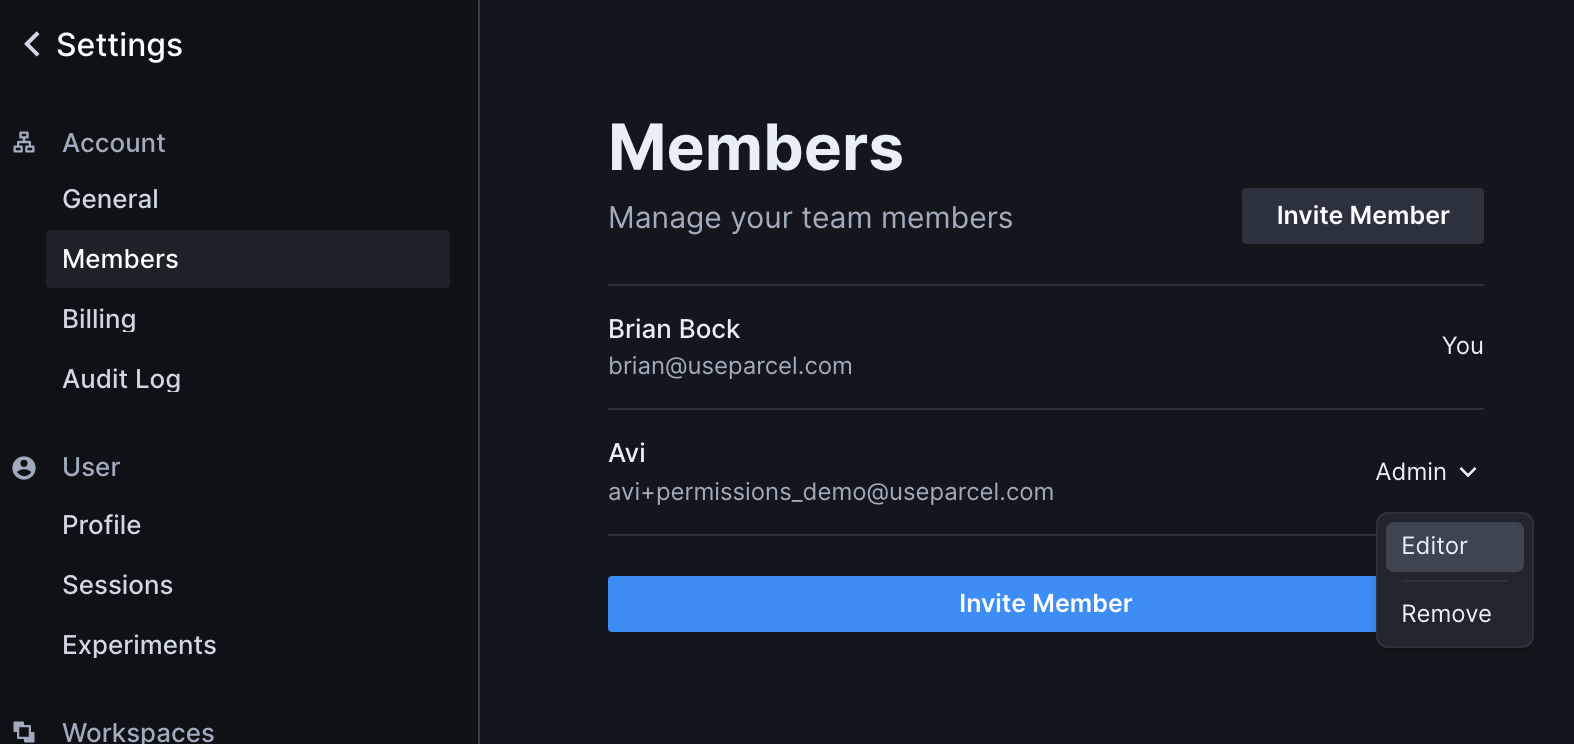 Image of the Members settings page, which lists the name and email address of the current members on the team. To the right of each user is a drop down menu that shows their current role. The role menu for one user is open, revealing options for "Admin", "Editor", and "Remove".